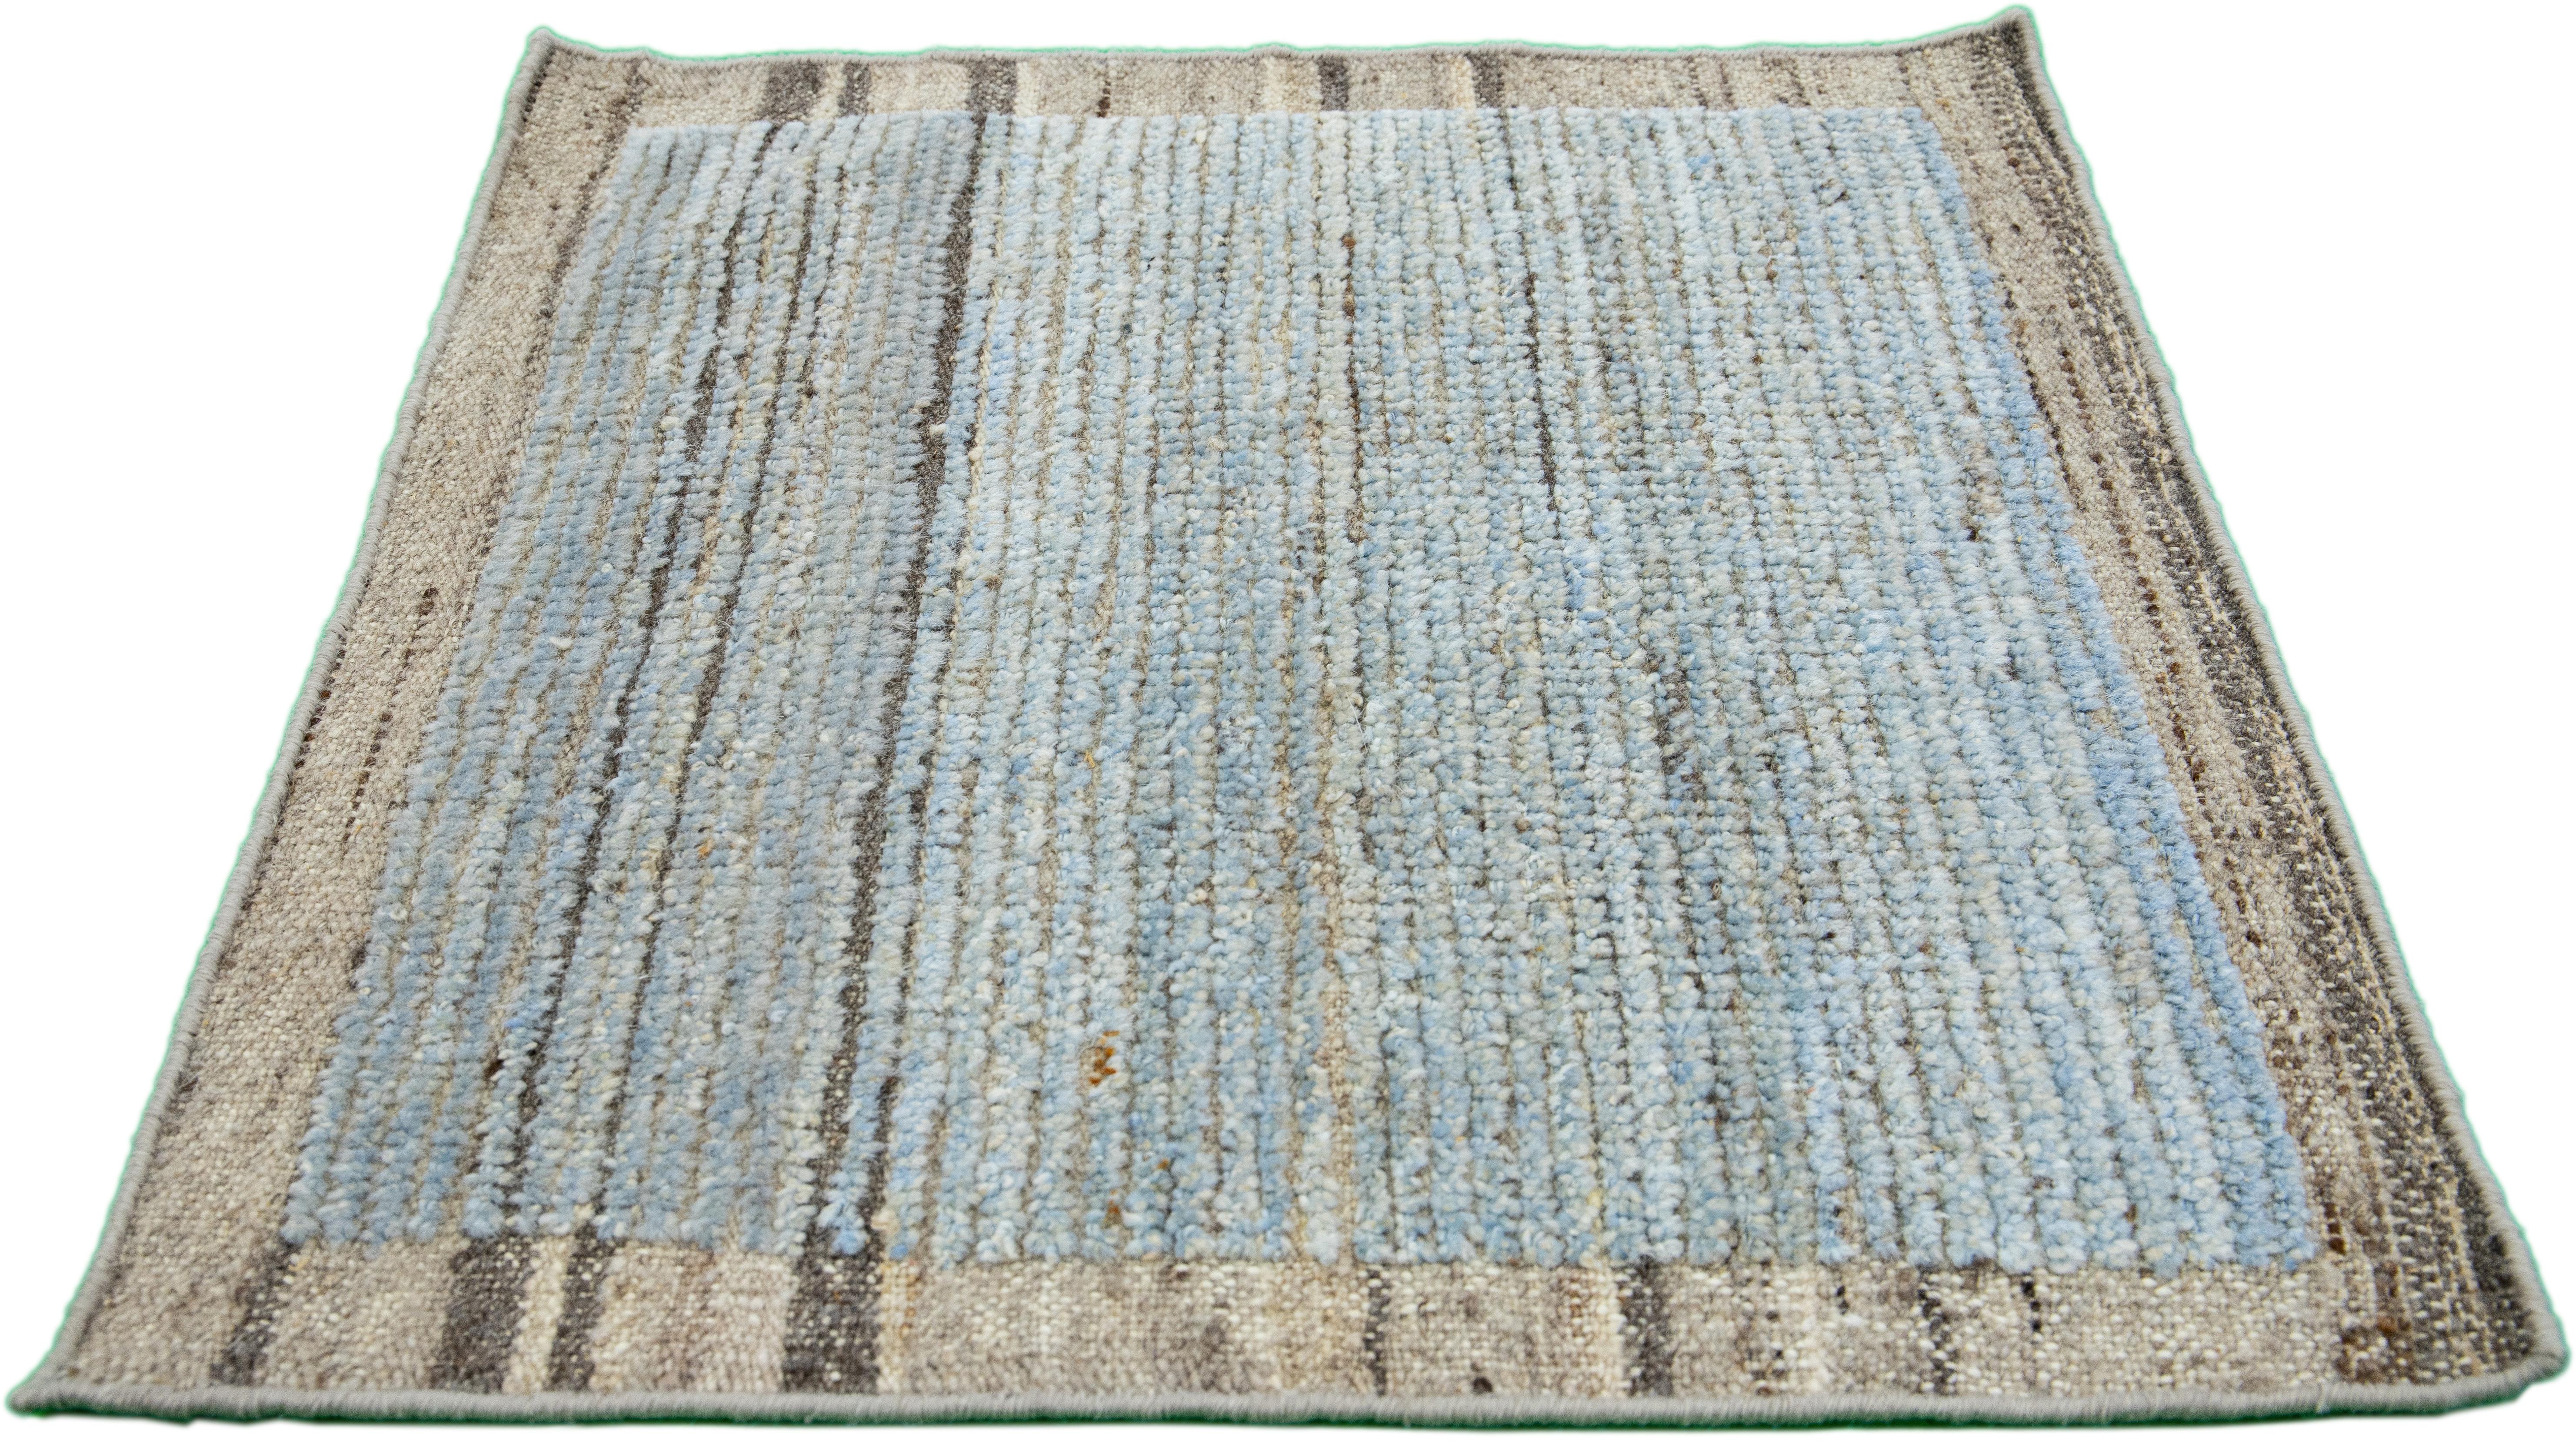 Apadana's Modern Moroccan Style custom wool rug. Custom sizes and colors made-to-order. 

Material: 100% Wool 
Techniques: Hand-knotted
Style: Moroccan 
Lead time: Approx. 15-16 wks available 
Colors: As shown, other custom colors are